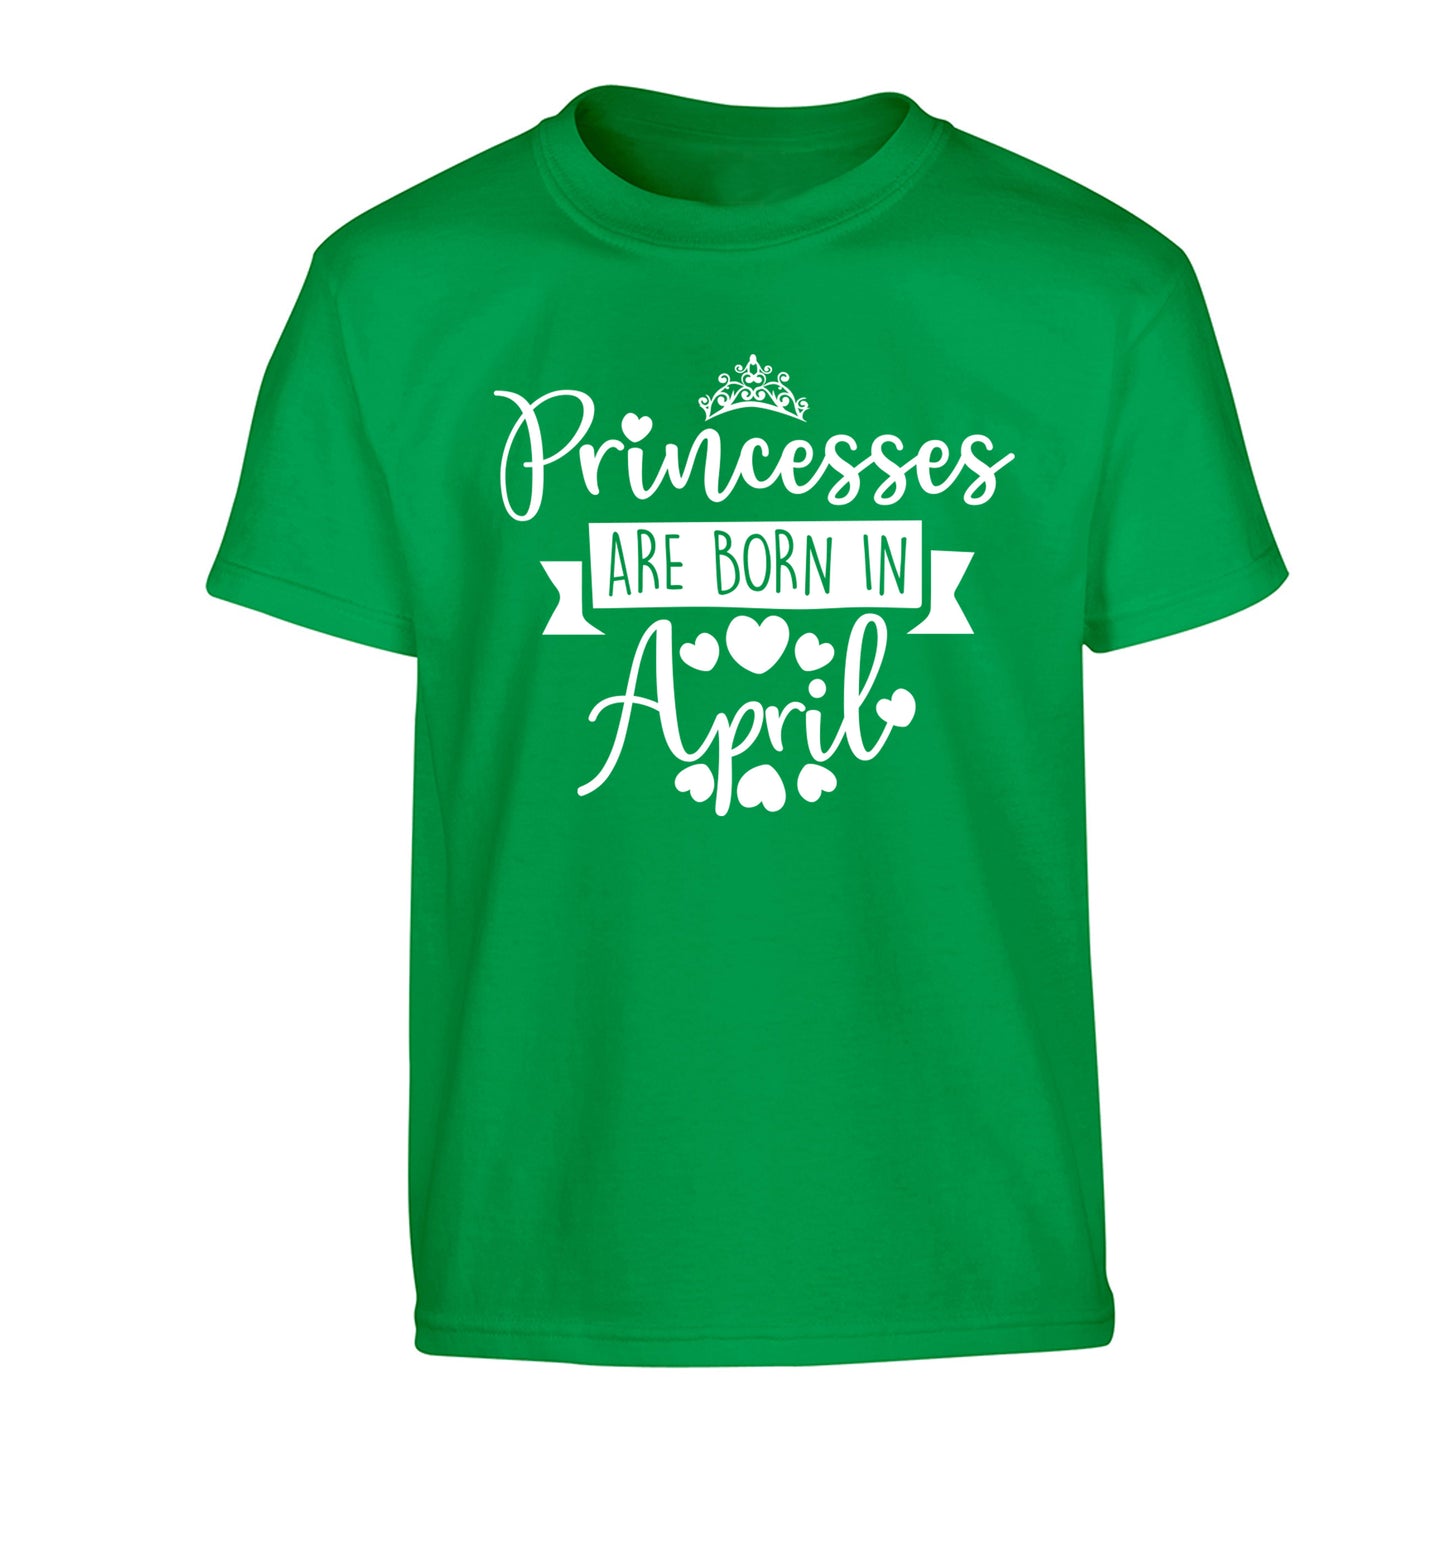 Princesses are born in April Children's green Tshirt 12-13 Years